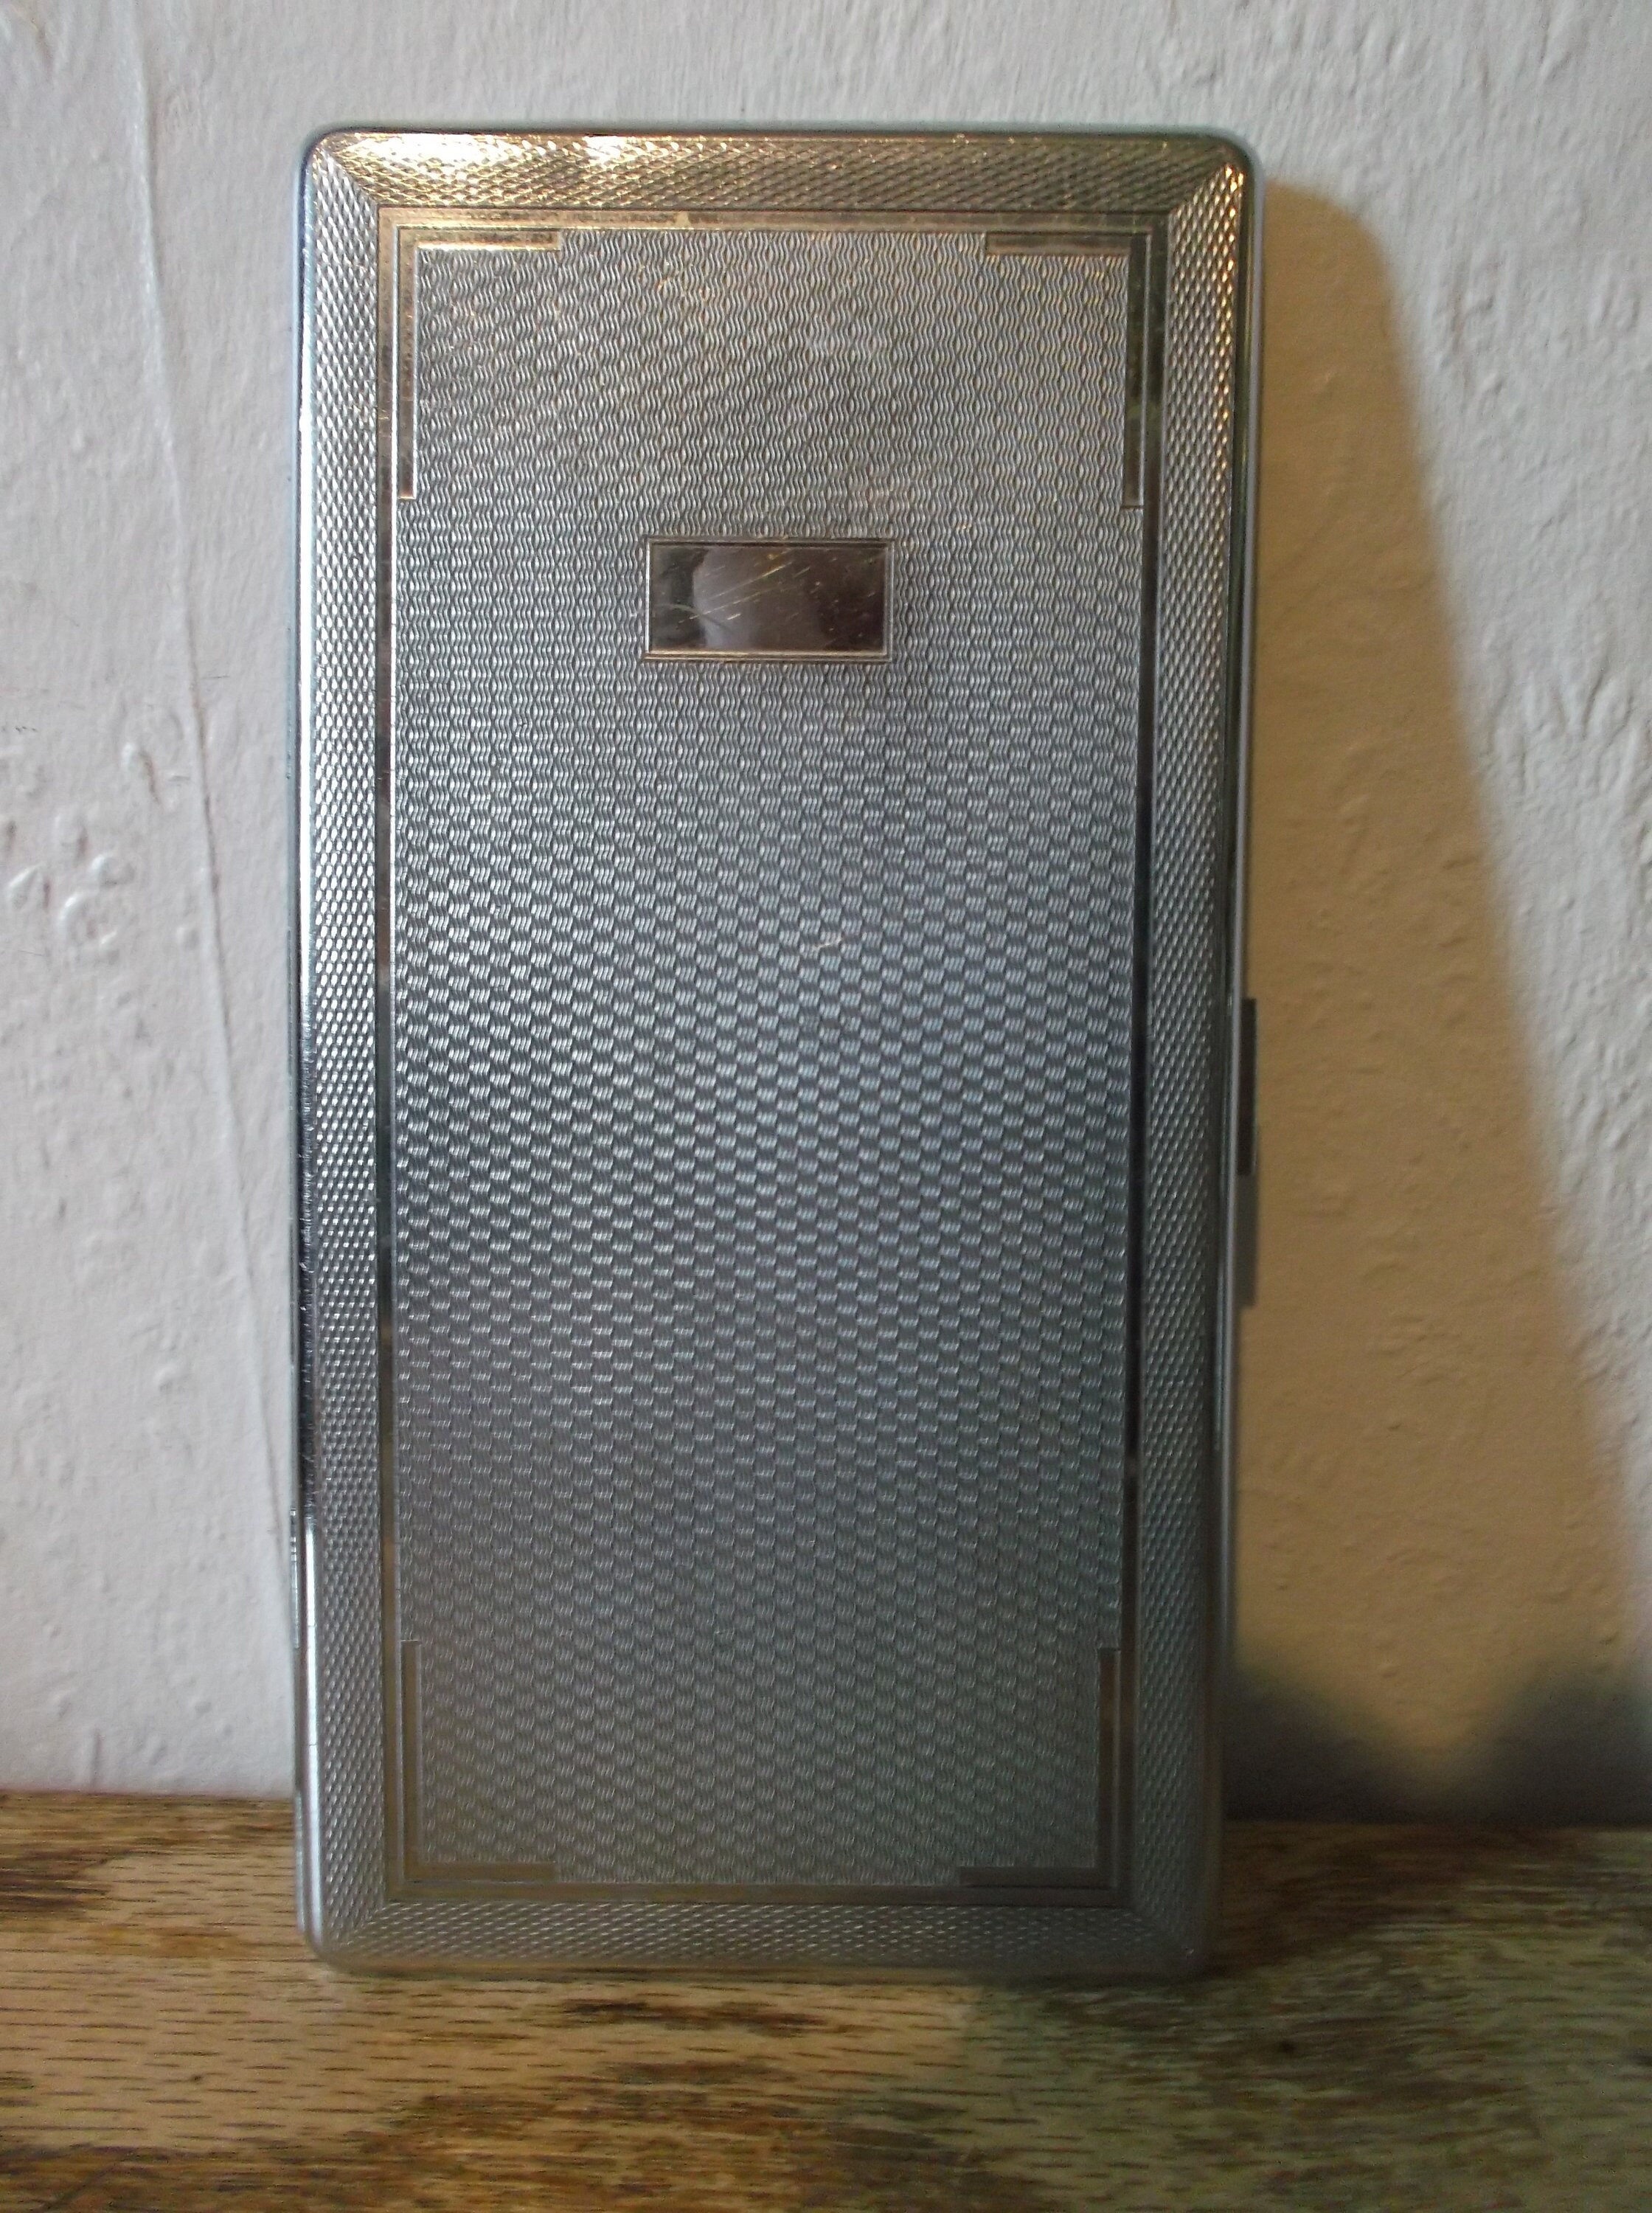 Vintage 1940s Embossed Leather and Metal Cigarette Case 